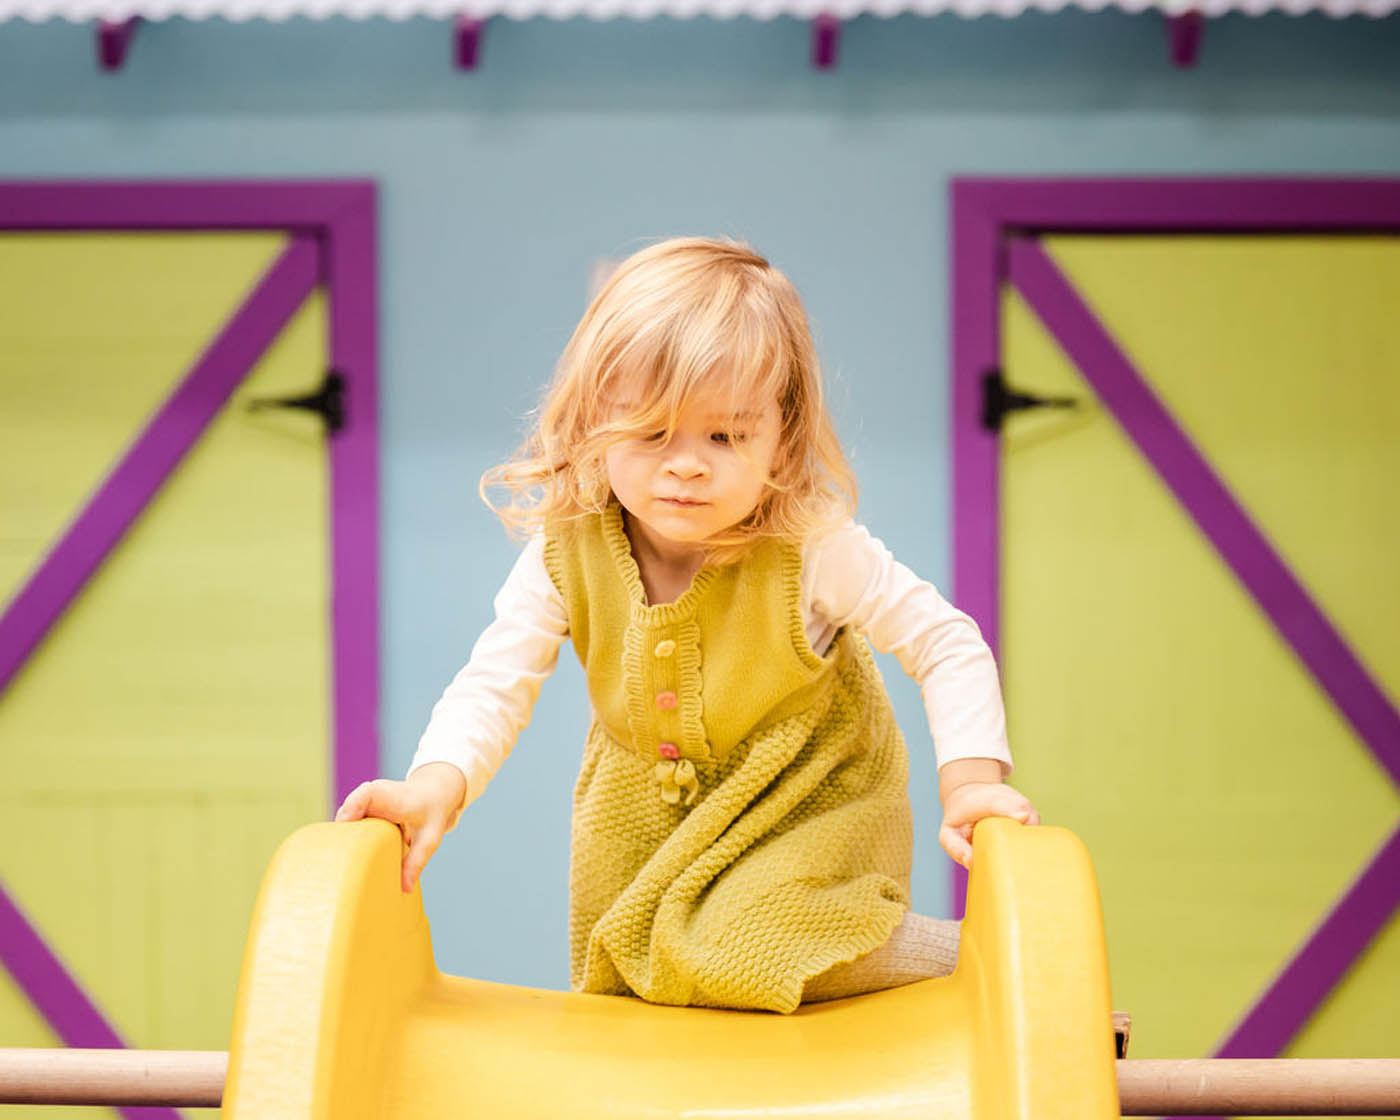 A toddler playing on a yellow slide at Romp n' Roll North Raleigh's classes for 3 year olds in Raleigh, NC